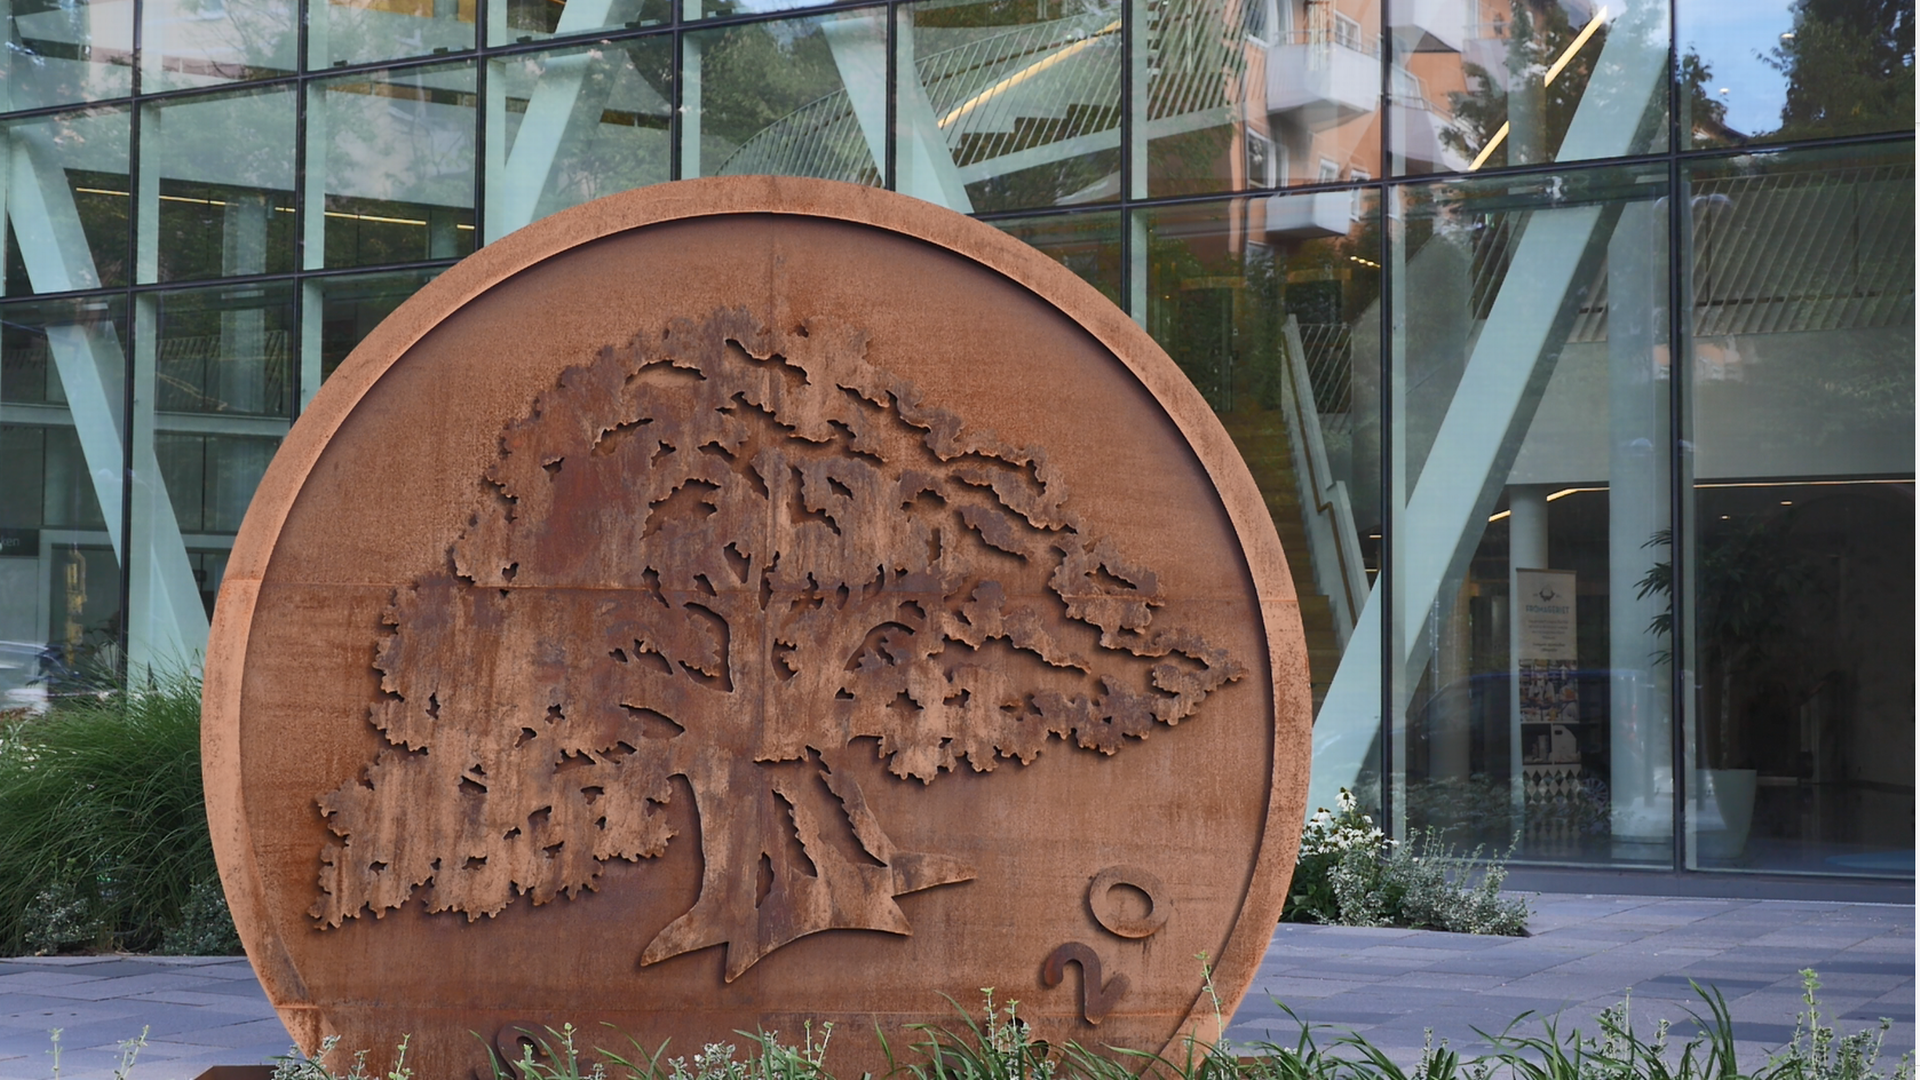 The "Swedbank coin" is placed in front of the banking groups headquarters in central Stockholm. | Photo: Swedbank Robur/PR